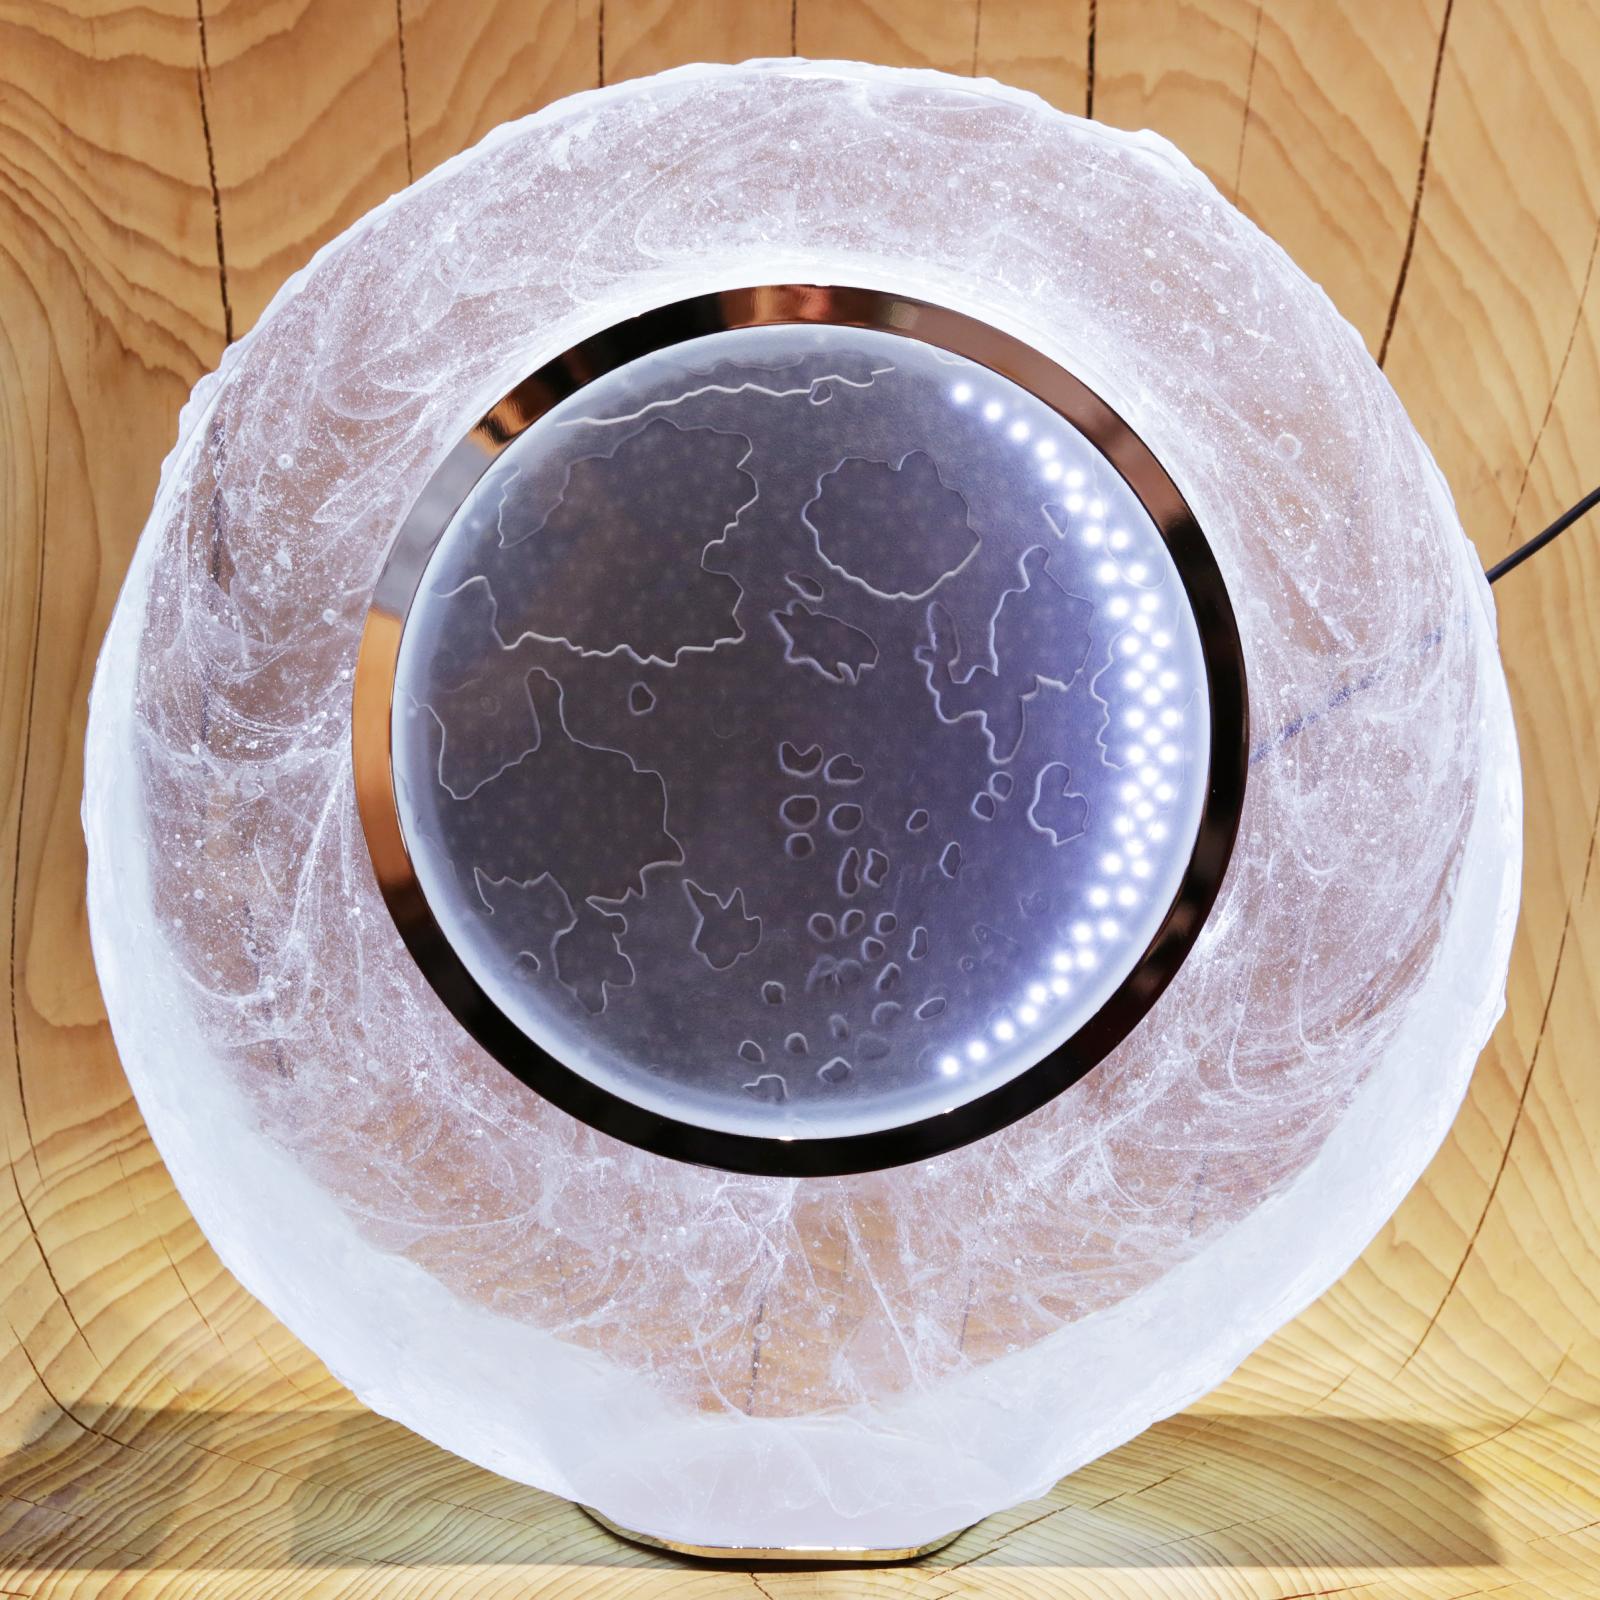 Lunar clock in pure crystal glass paste made in France in 2018.
Clock showing moon age, also shows moon sunsets and sunrises.
Major world cities are planned. Moon appears in crystal block filled
with a multitude of clouds and dotted with craters